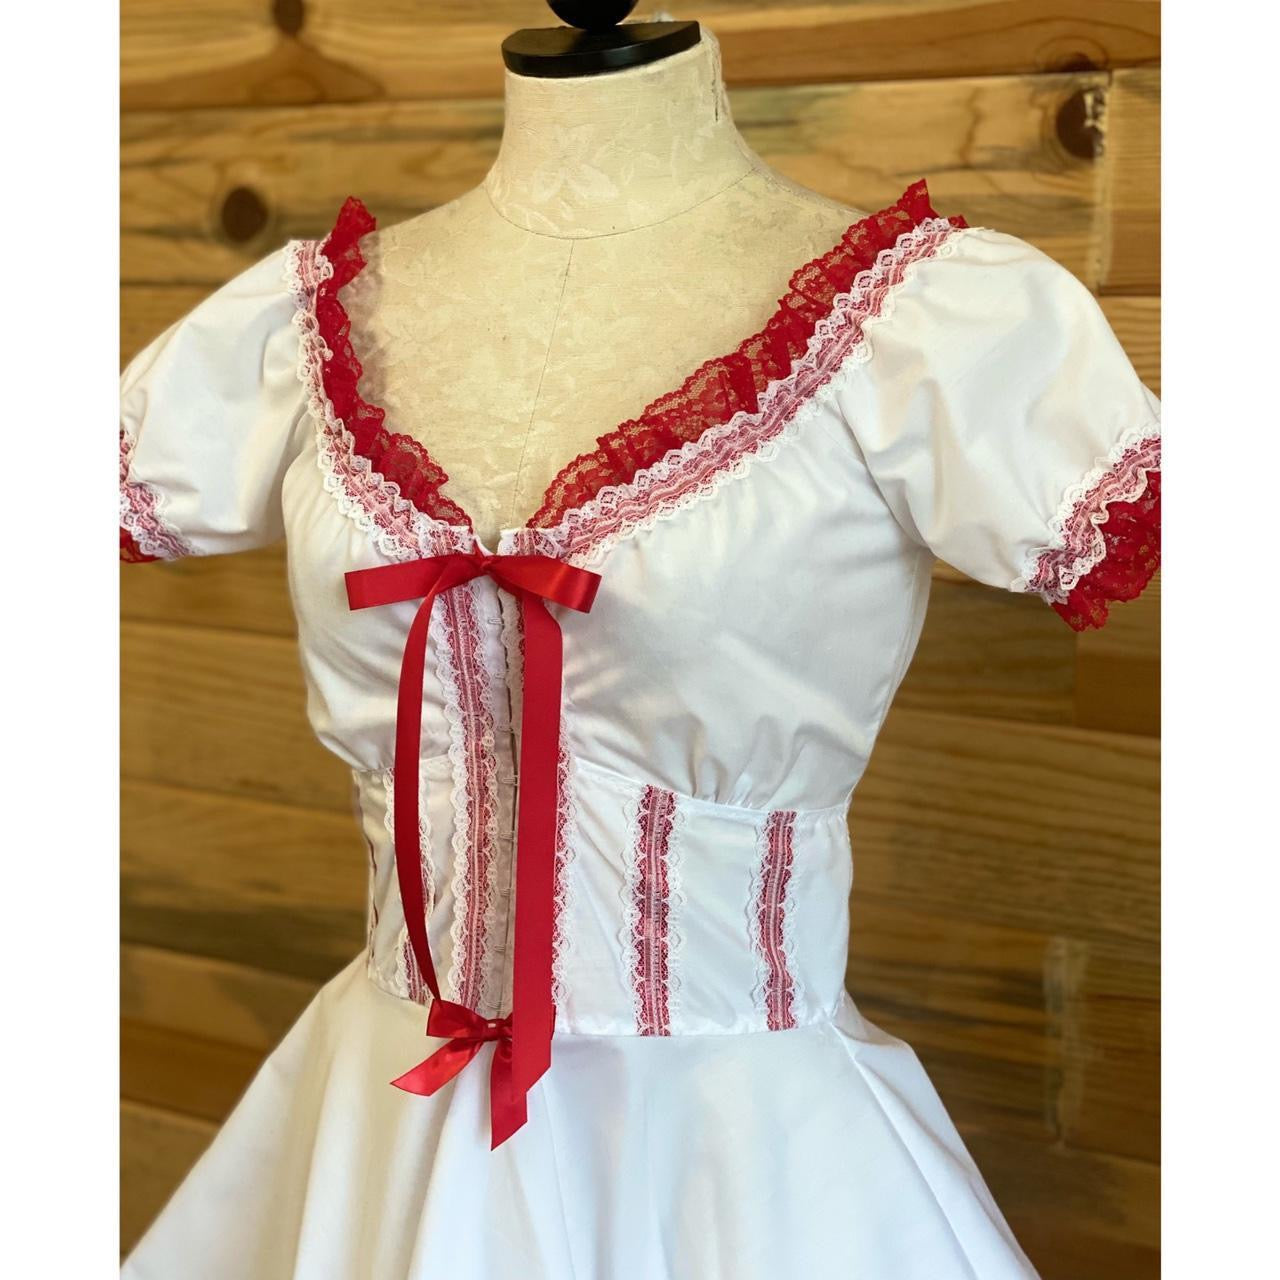 The Maja Dress in White and Red